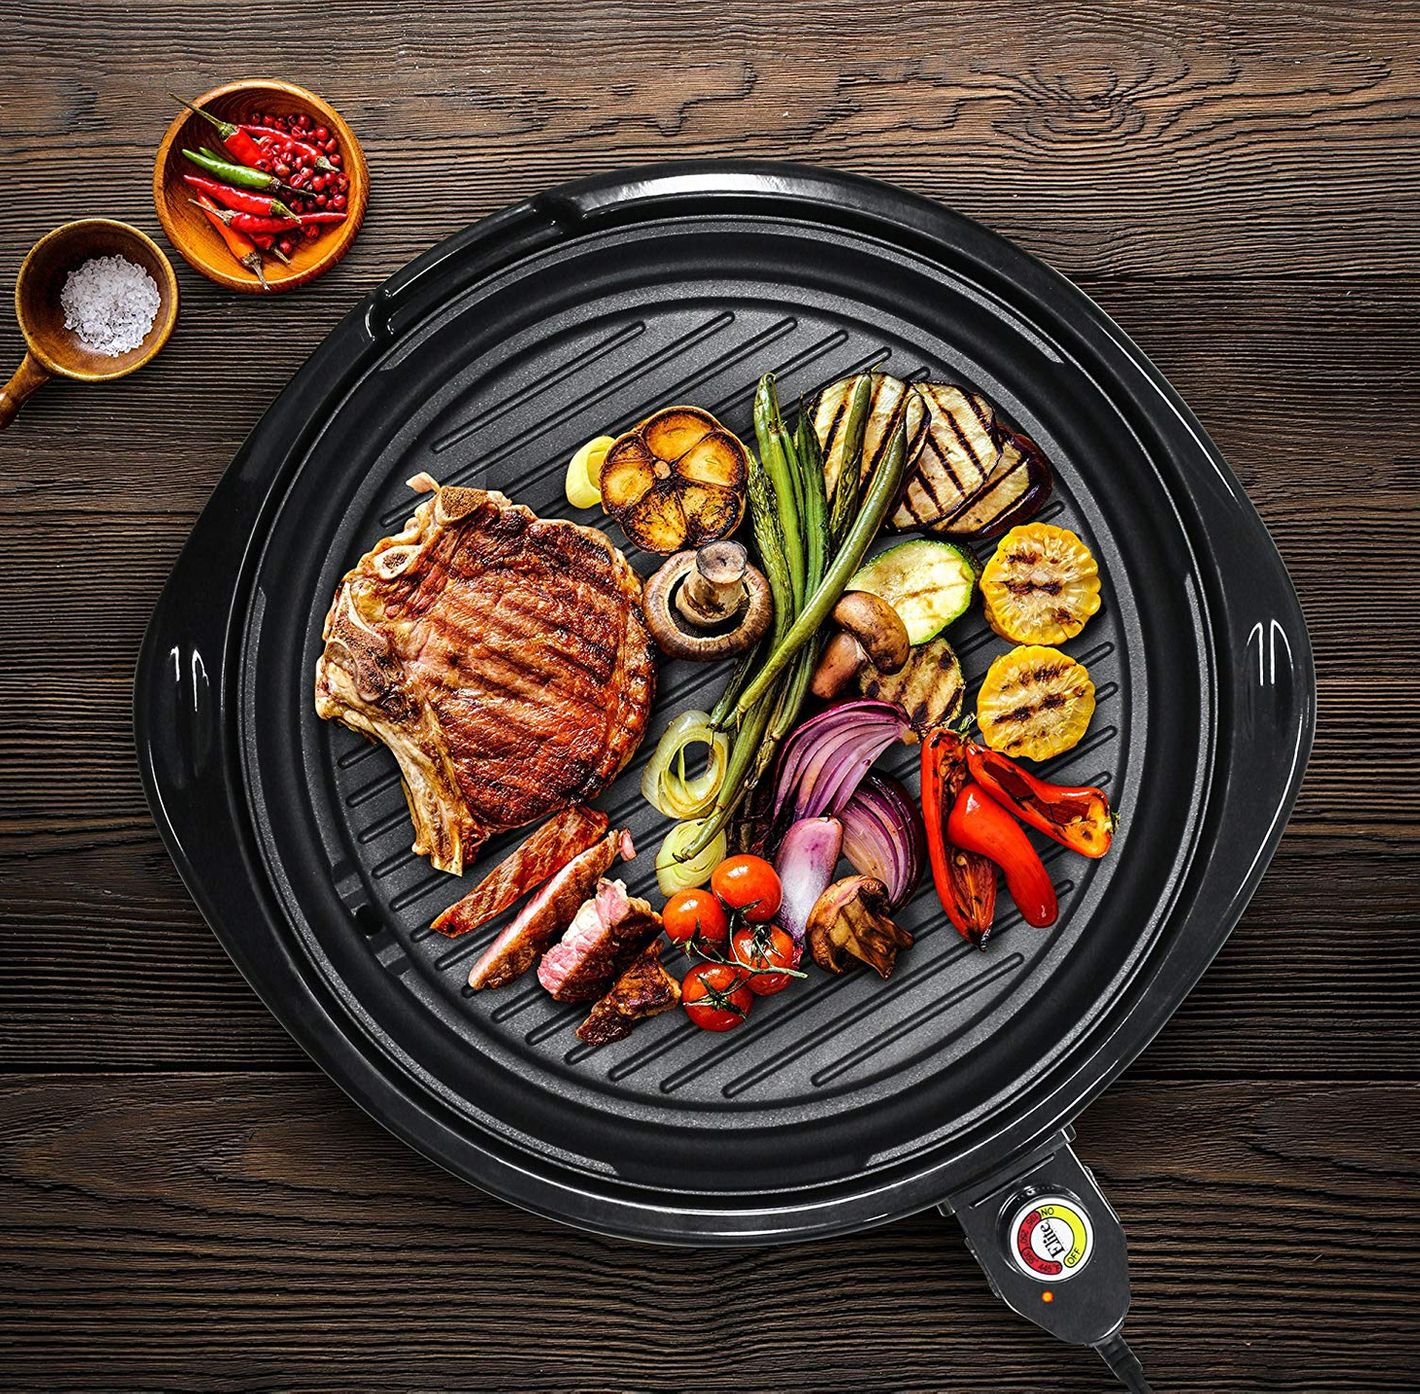 Danby Introduces Indoor Countertop Grill with Smoke Extractor Fan